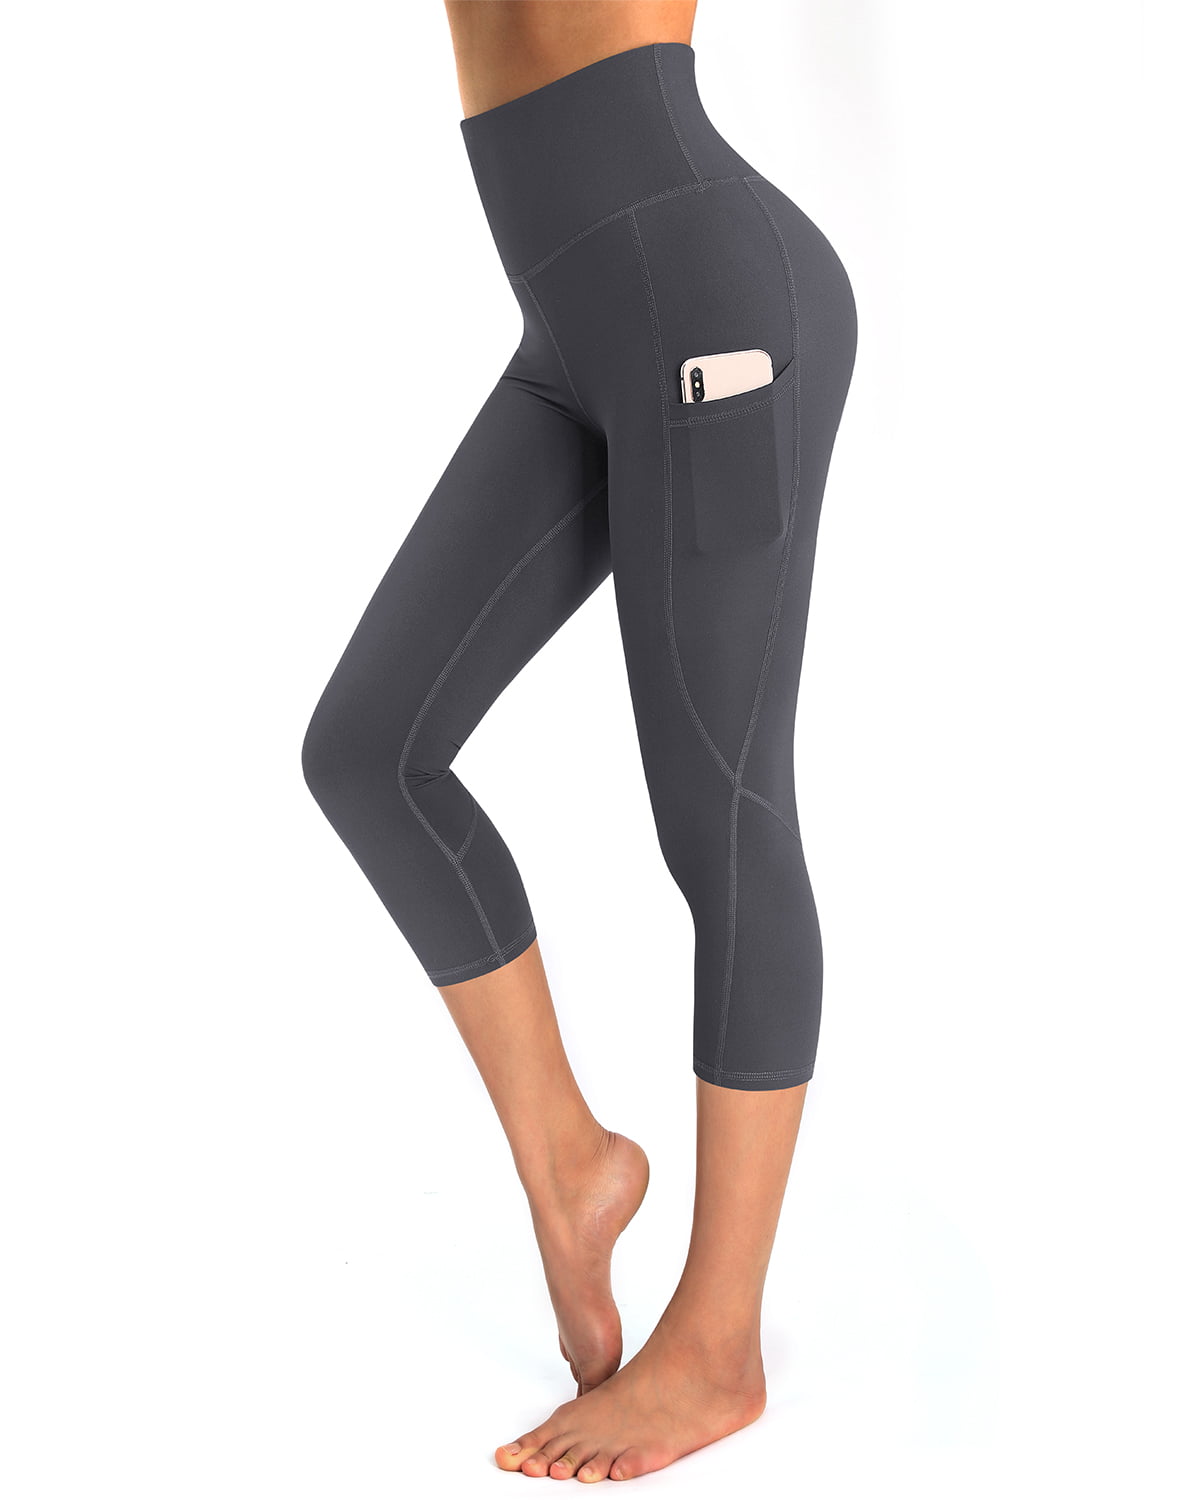 Sugar Pocket Womens Running Leggings Workout Trousers Pants with Side Pockets